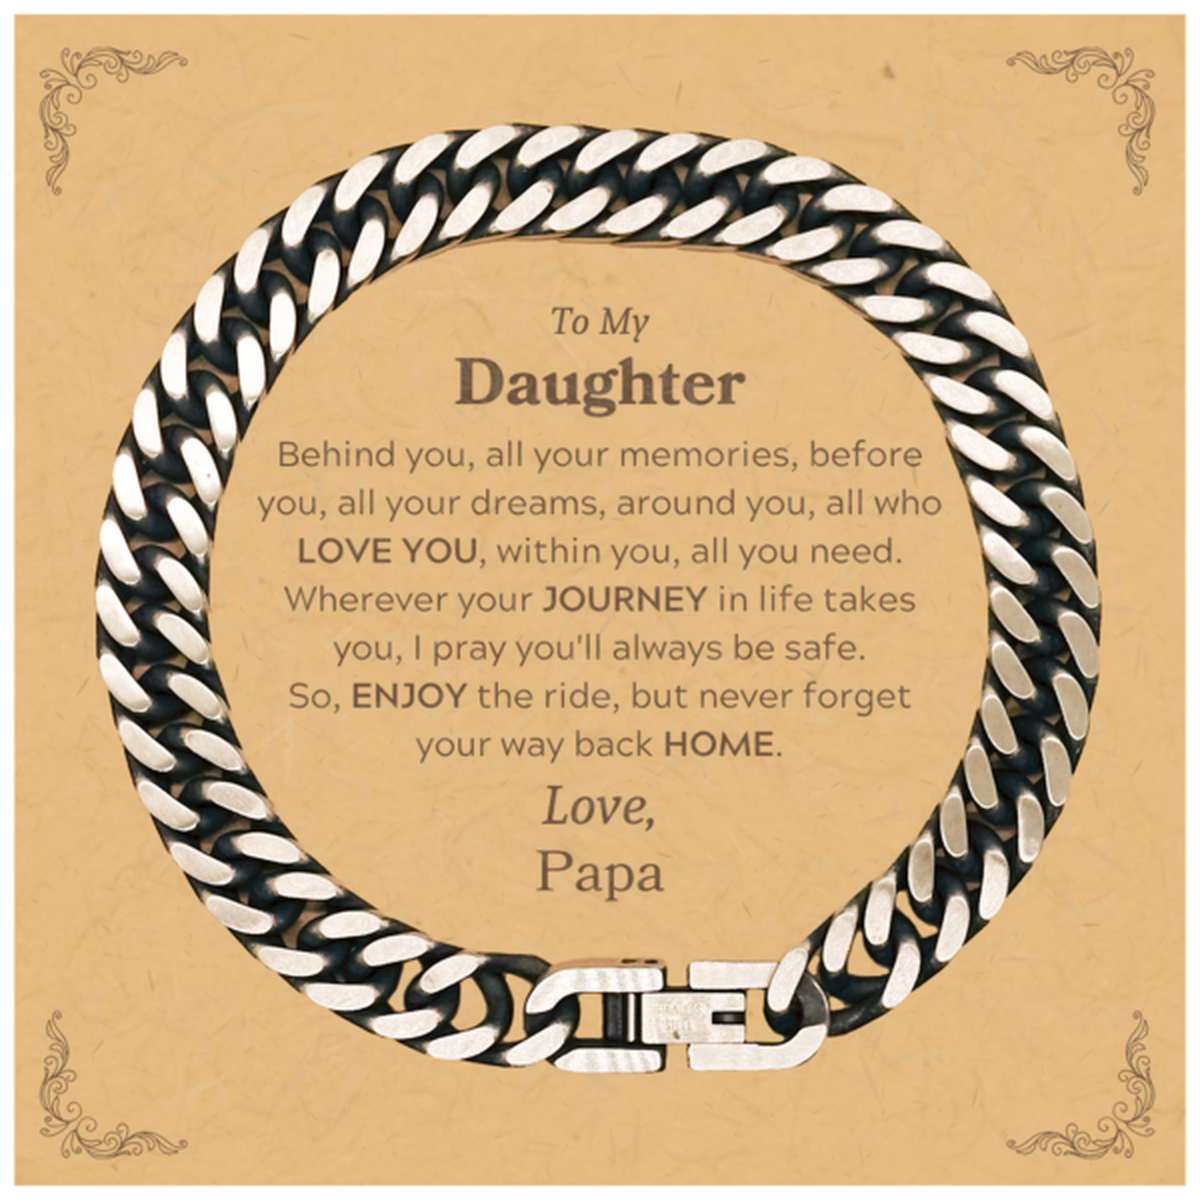 To My Daughter Graduation Gifts from Papa, Daughter Cuban Link Chain Bracelet Christmas Birthday Gifts for Daughter Behind you, all your memories, before you, all your dreams. Love, Papa